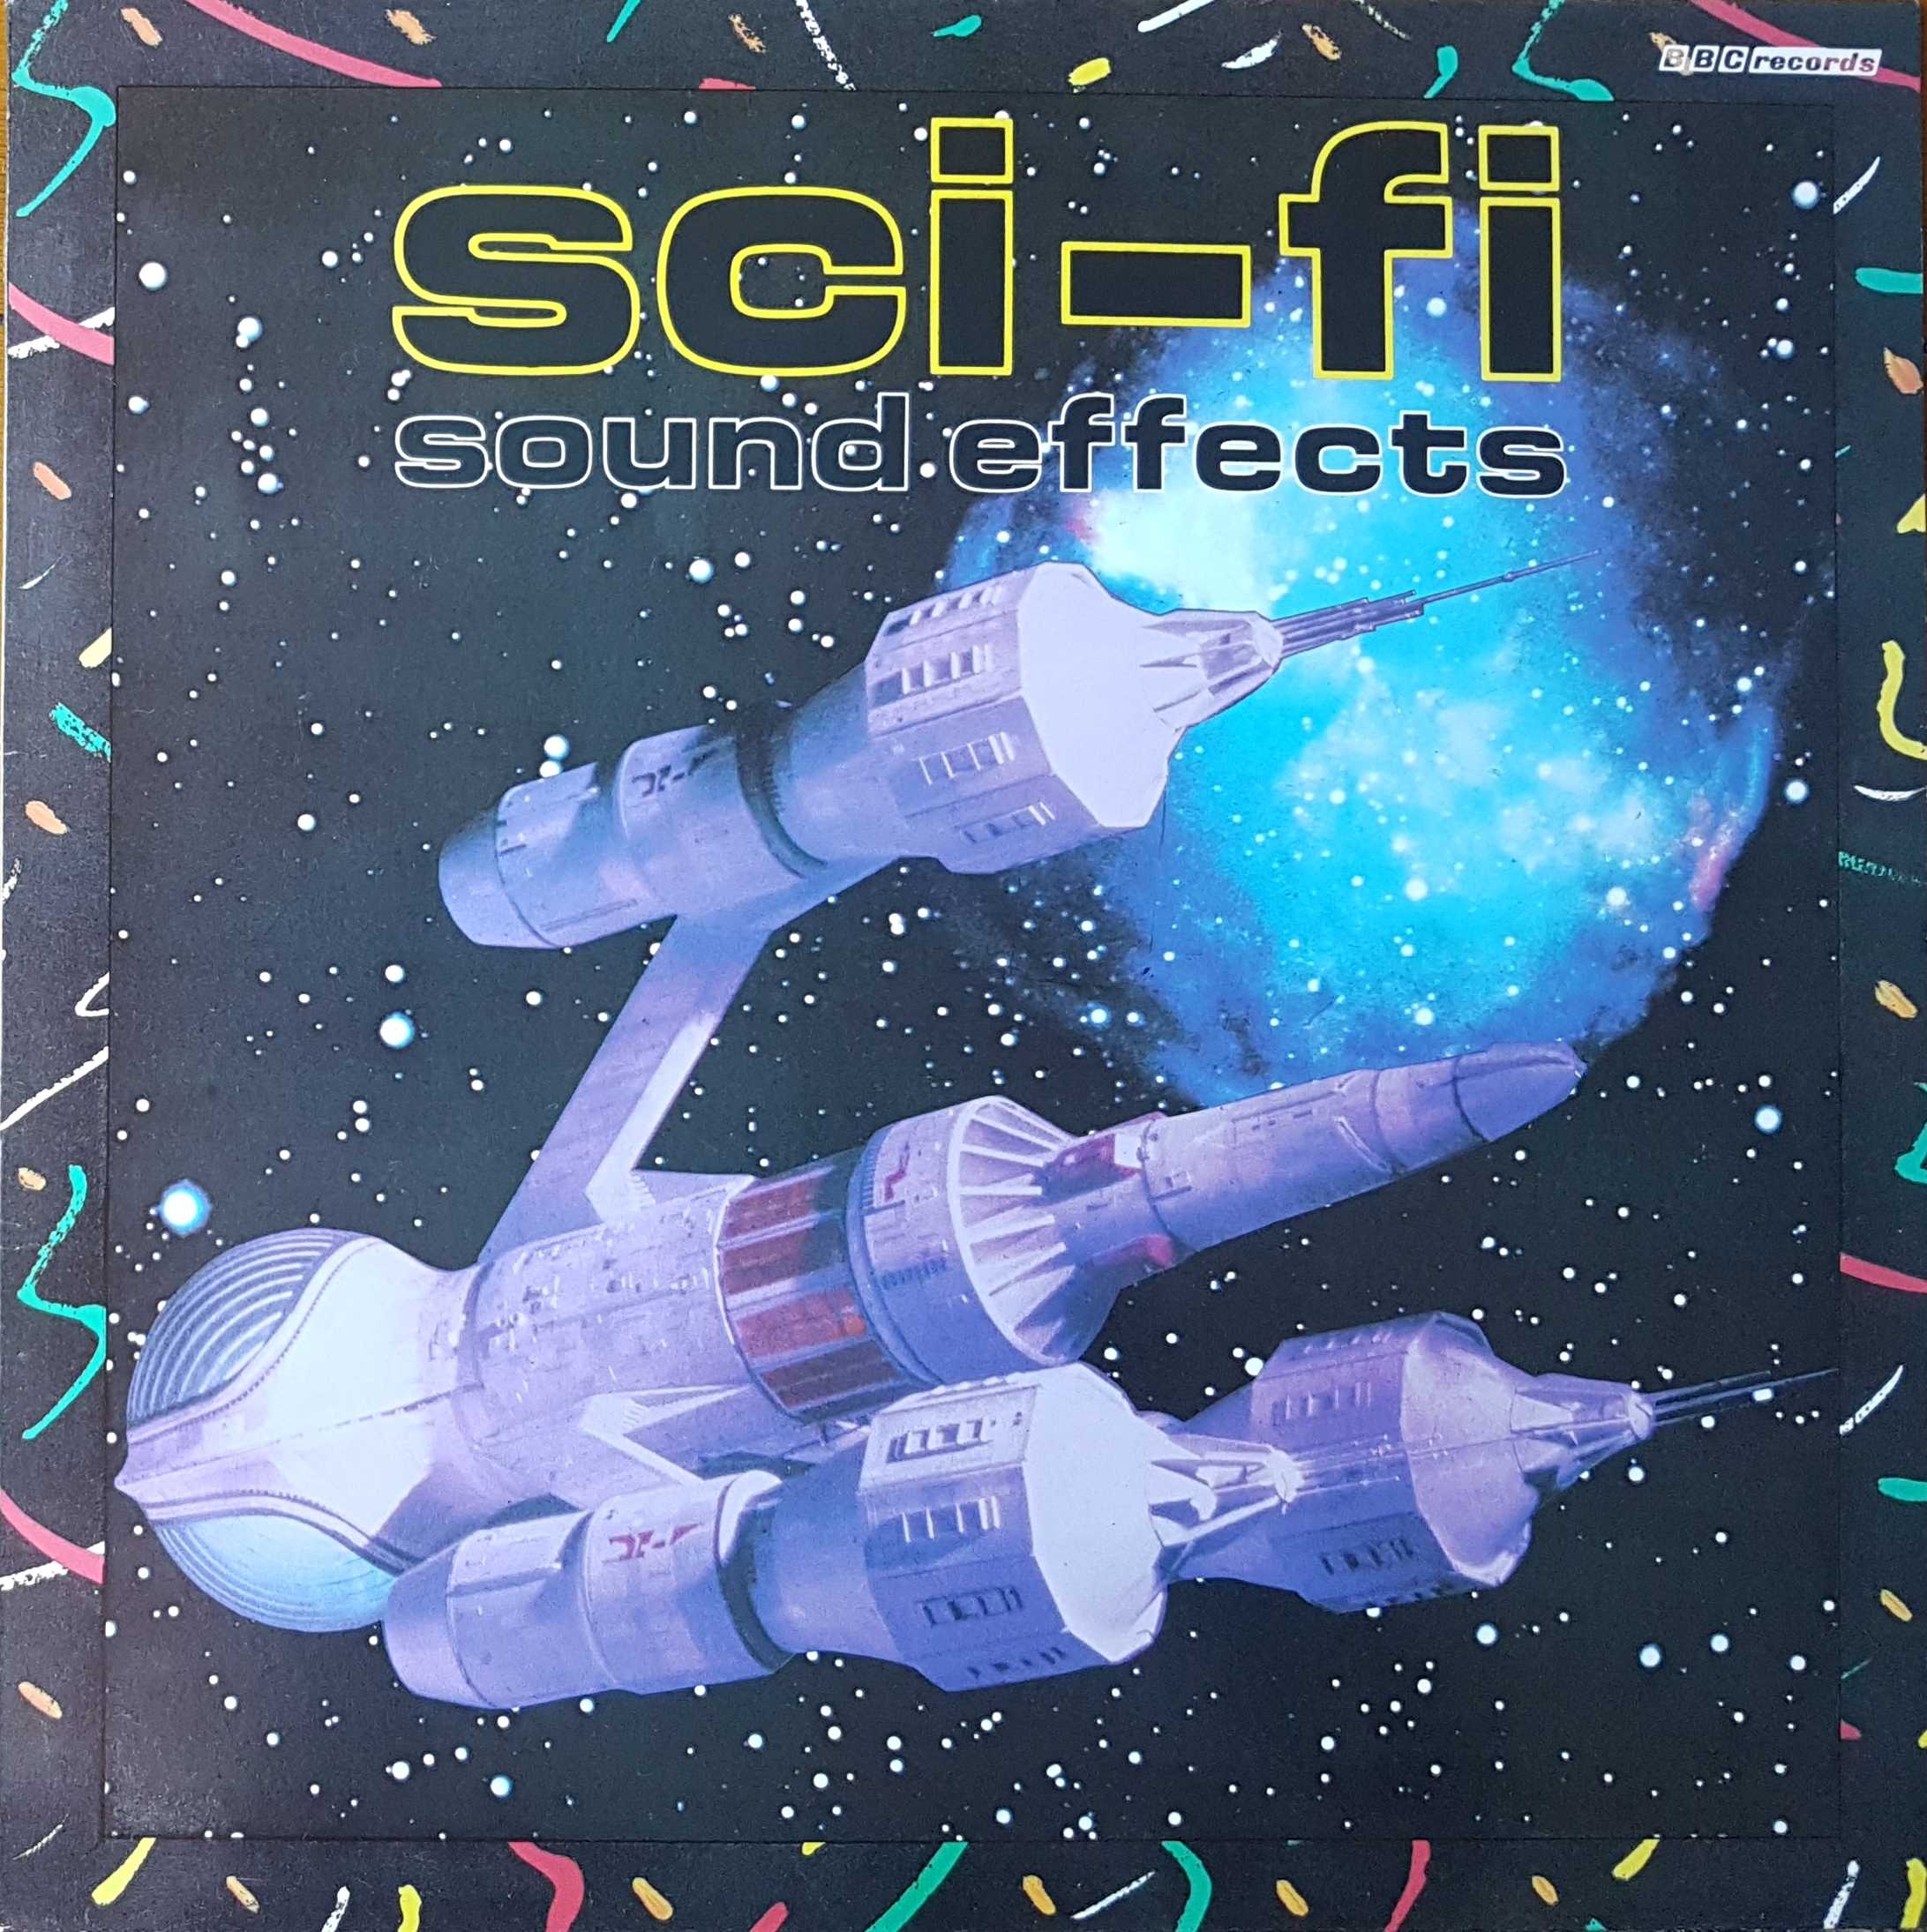 Picture of REC 420 Science fiction sound effects (no. 26) by artist Various from the BBC albums - Records and Tapes library